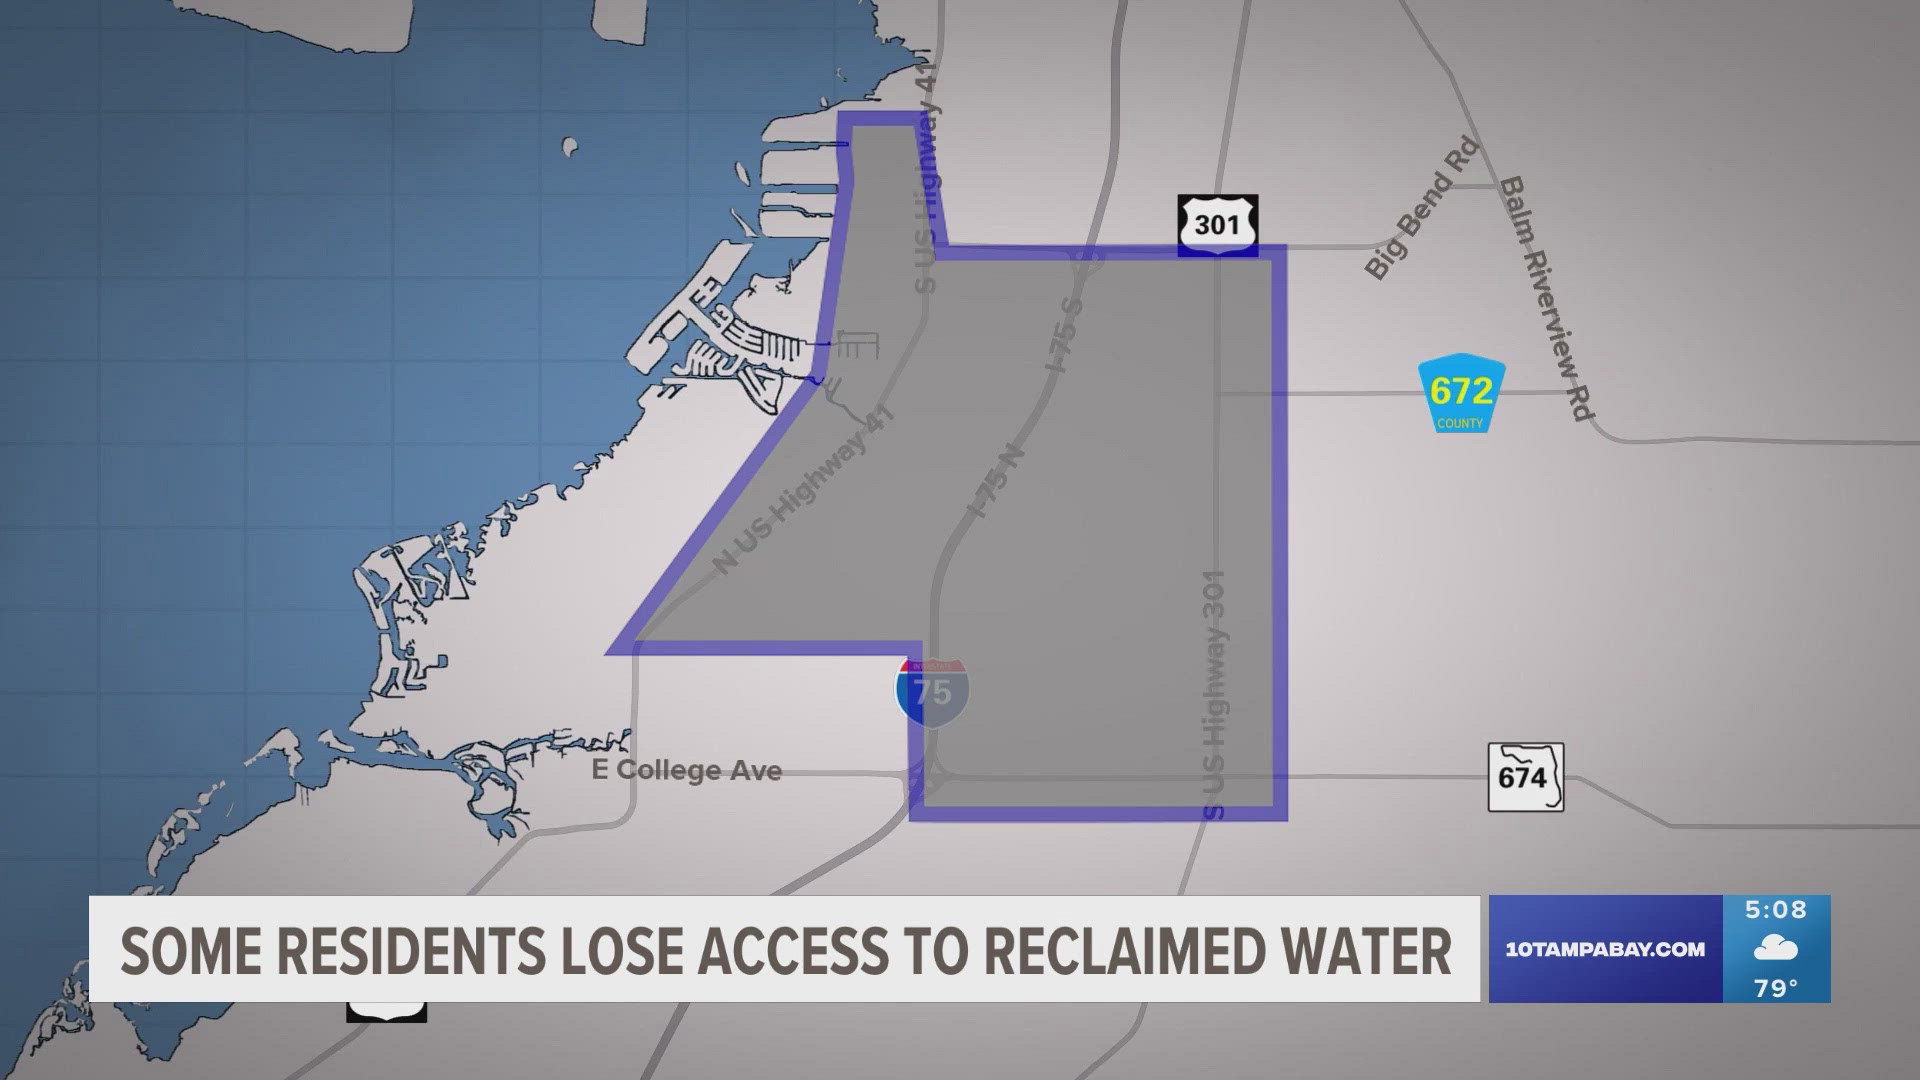 Southern Hillsborough County residents still don't have access to reclaimed water because of a problem with the disinfection system.